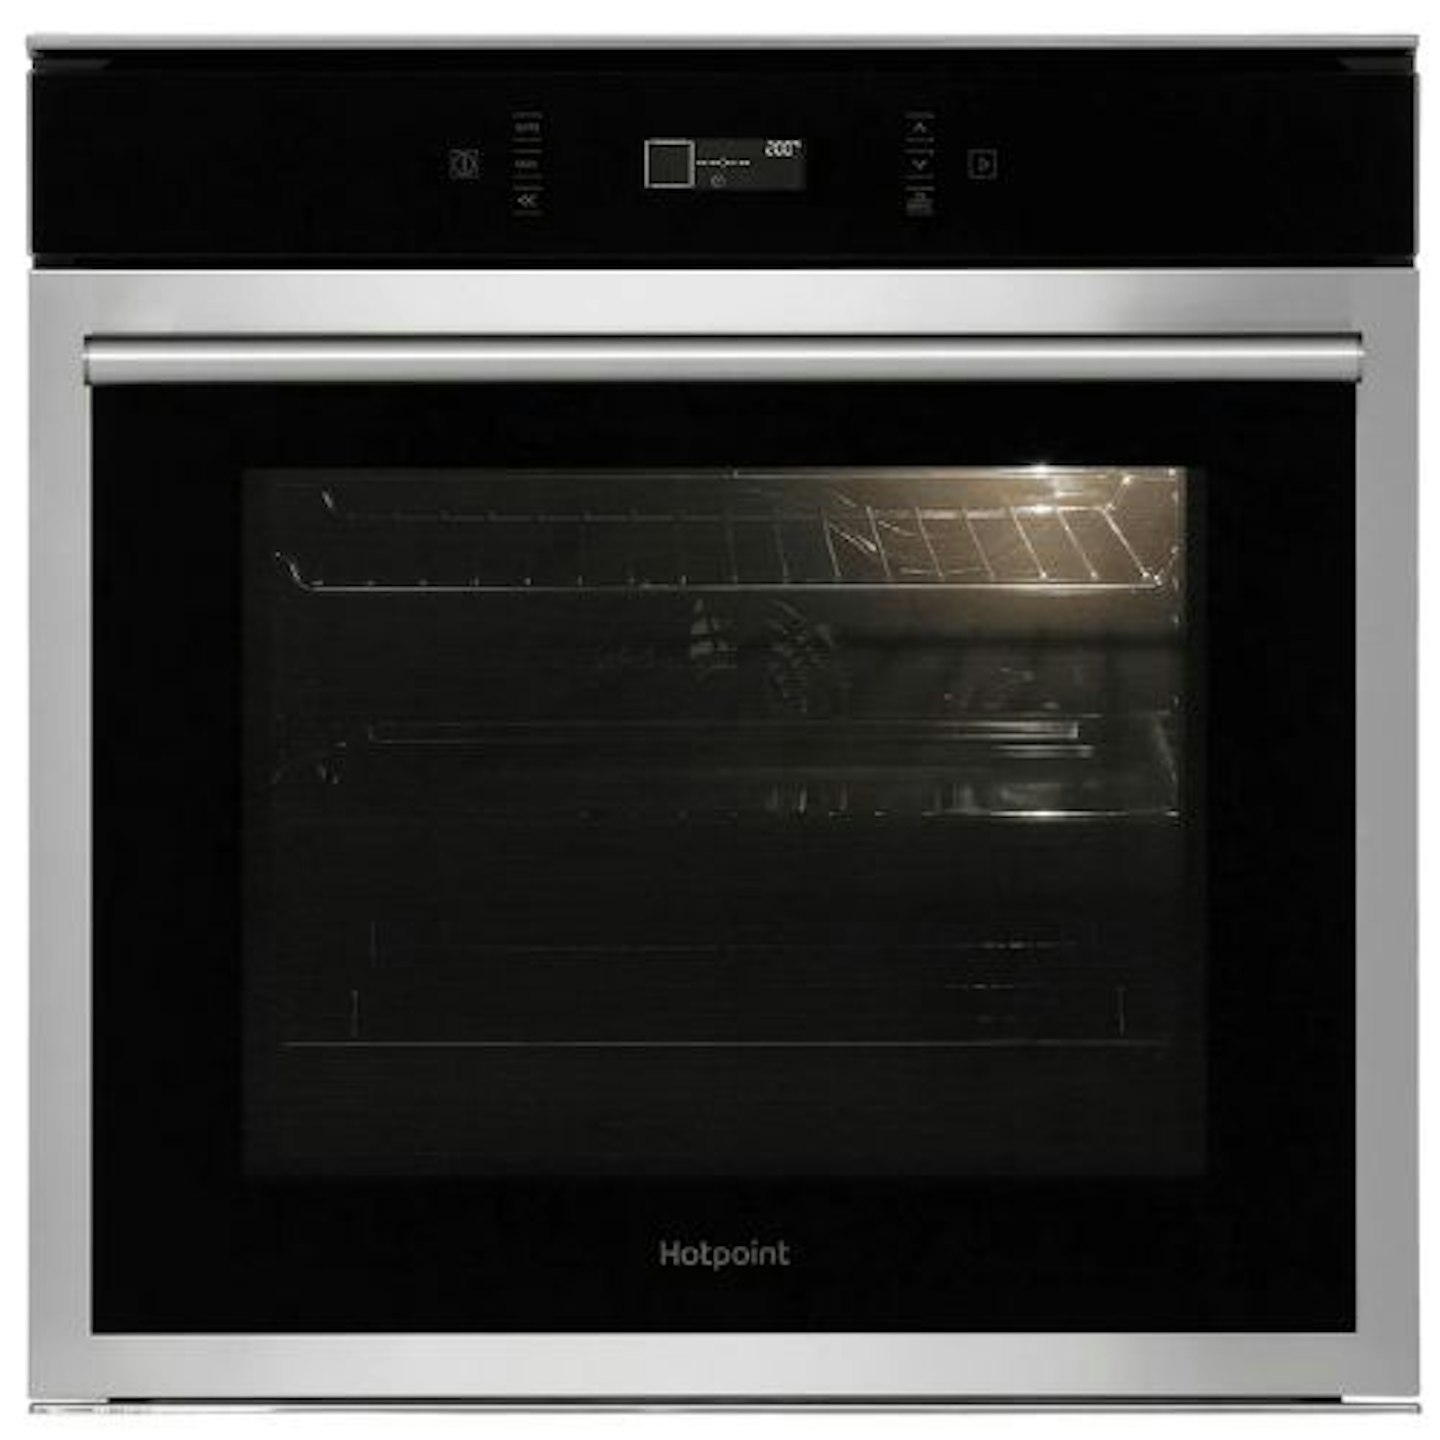 Hotpoint Class 6 SI6 874 SH IX Single Built-in Oven